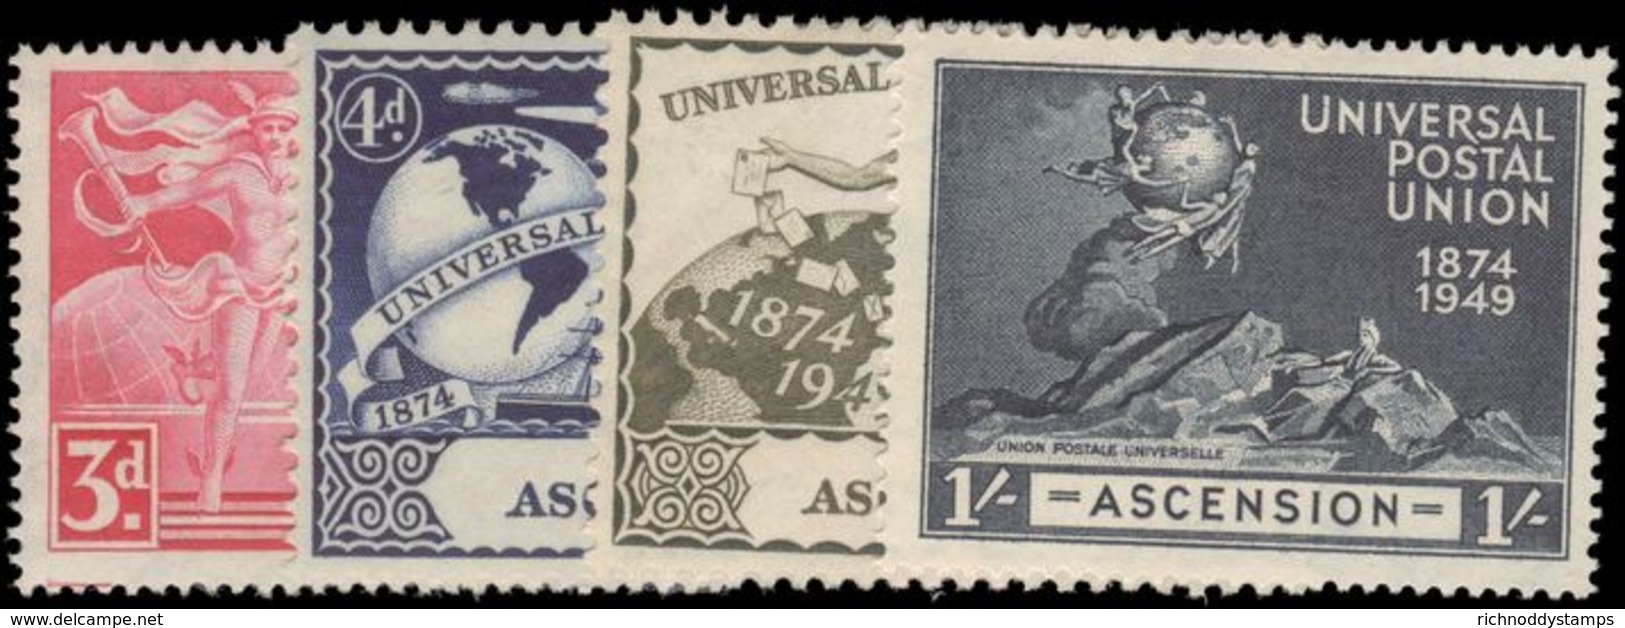 Ascension 1949 UPU Unmounted Mint. - Ascension